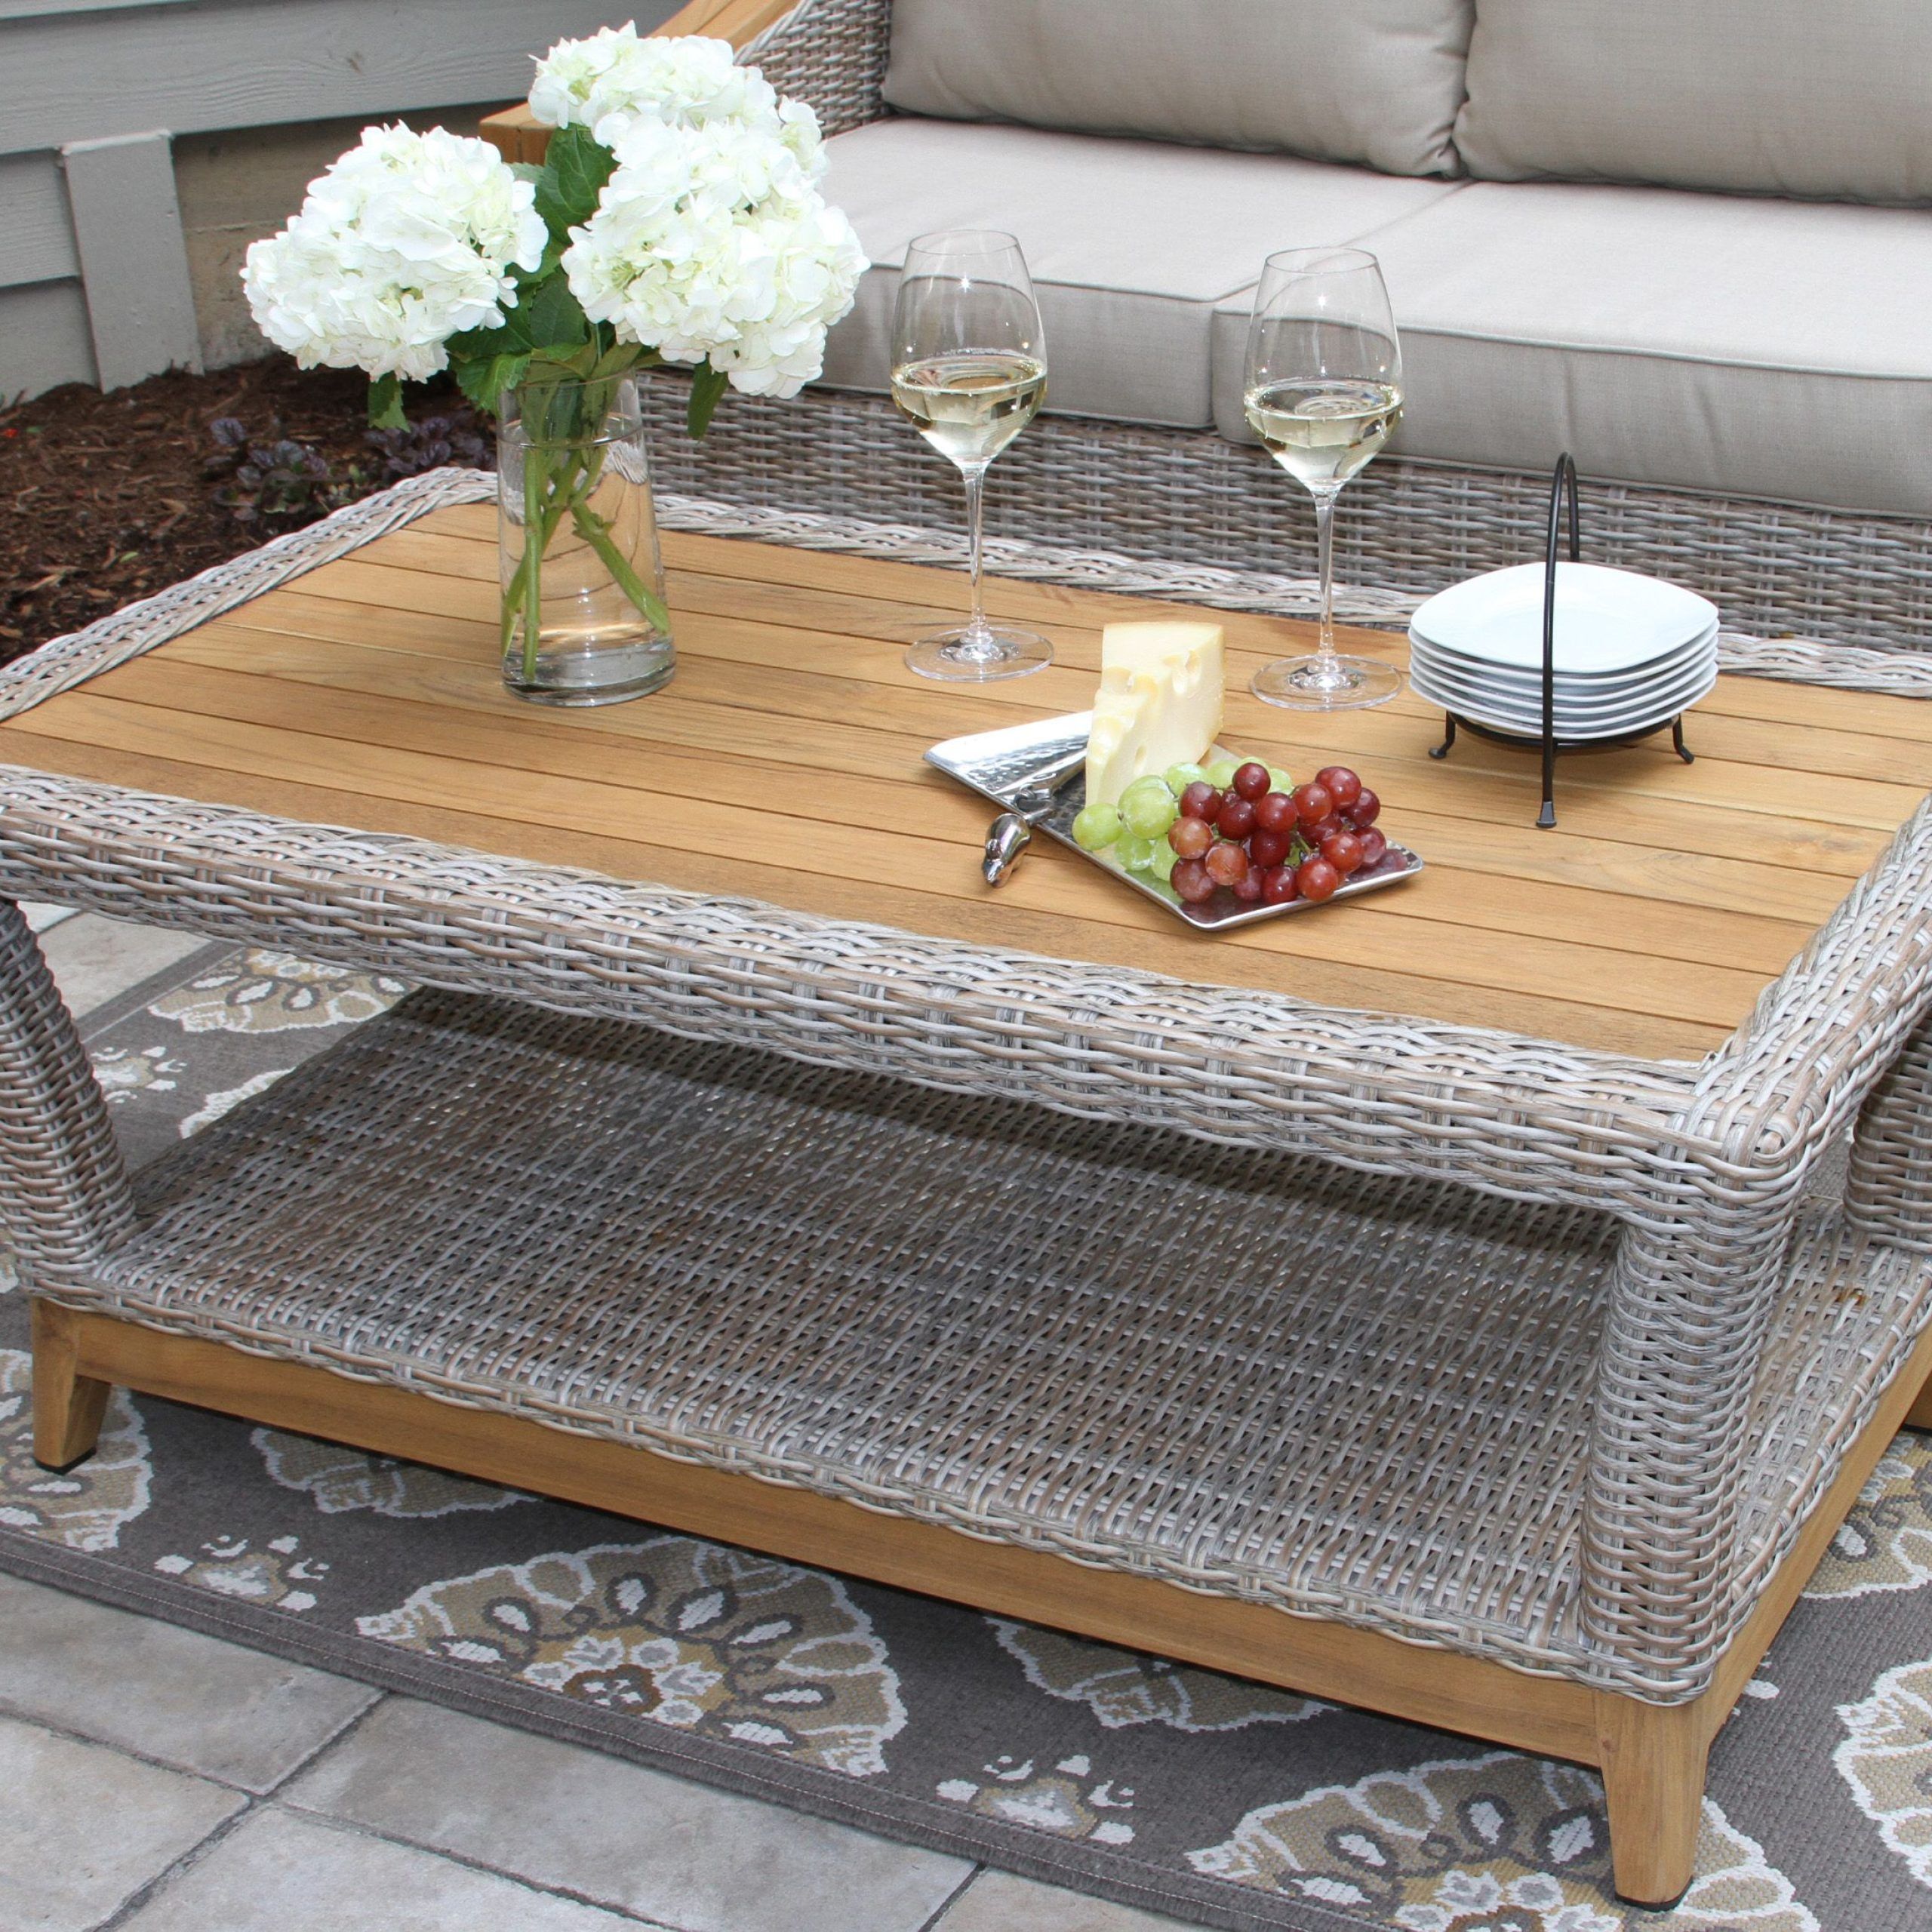 How To Decorate An Outdoor Coffee Table – Coffee Table Decor Intended For Outdoor Coffee Tables With Storage (View 11 of 15)